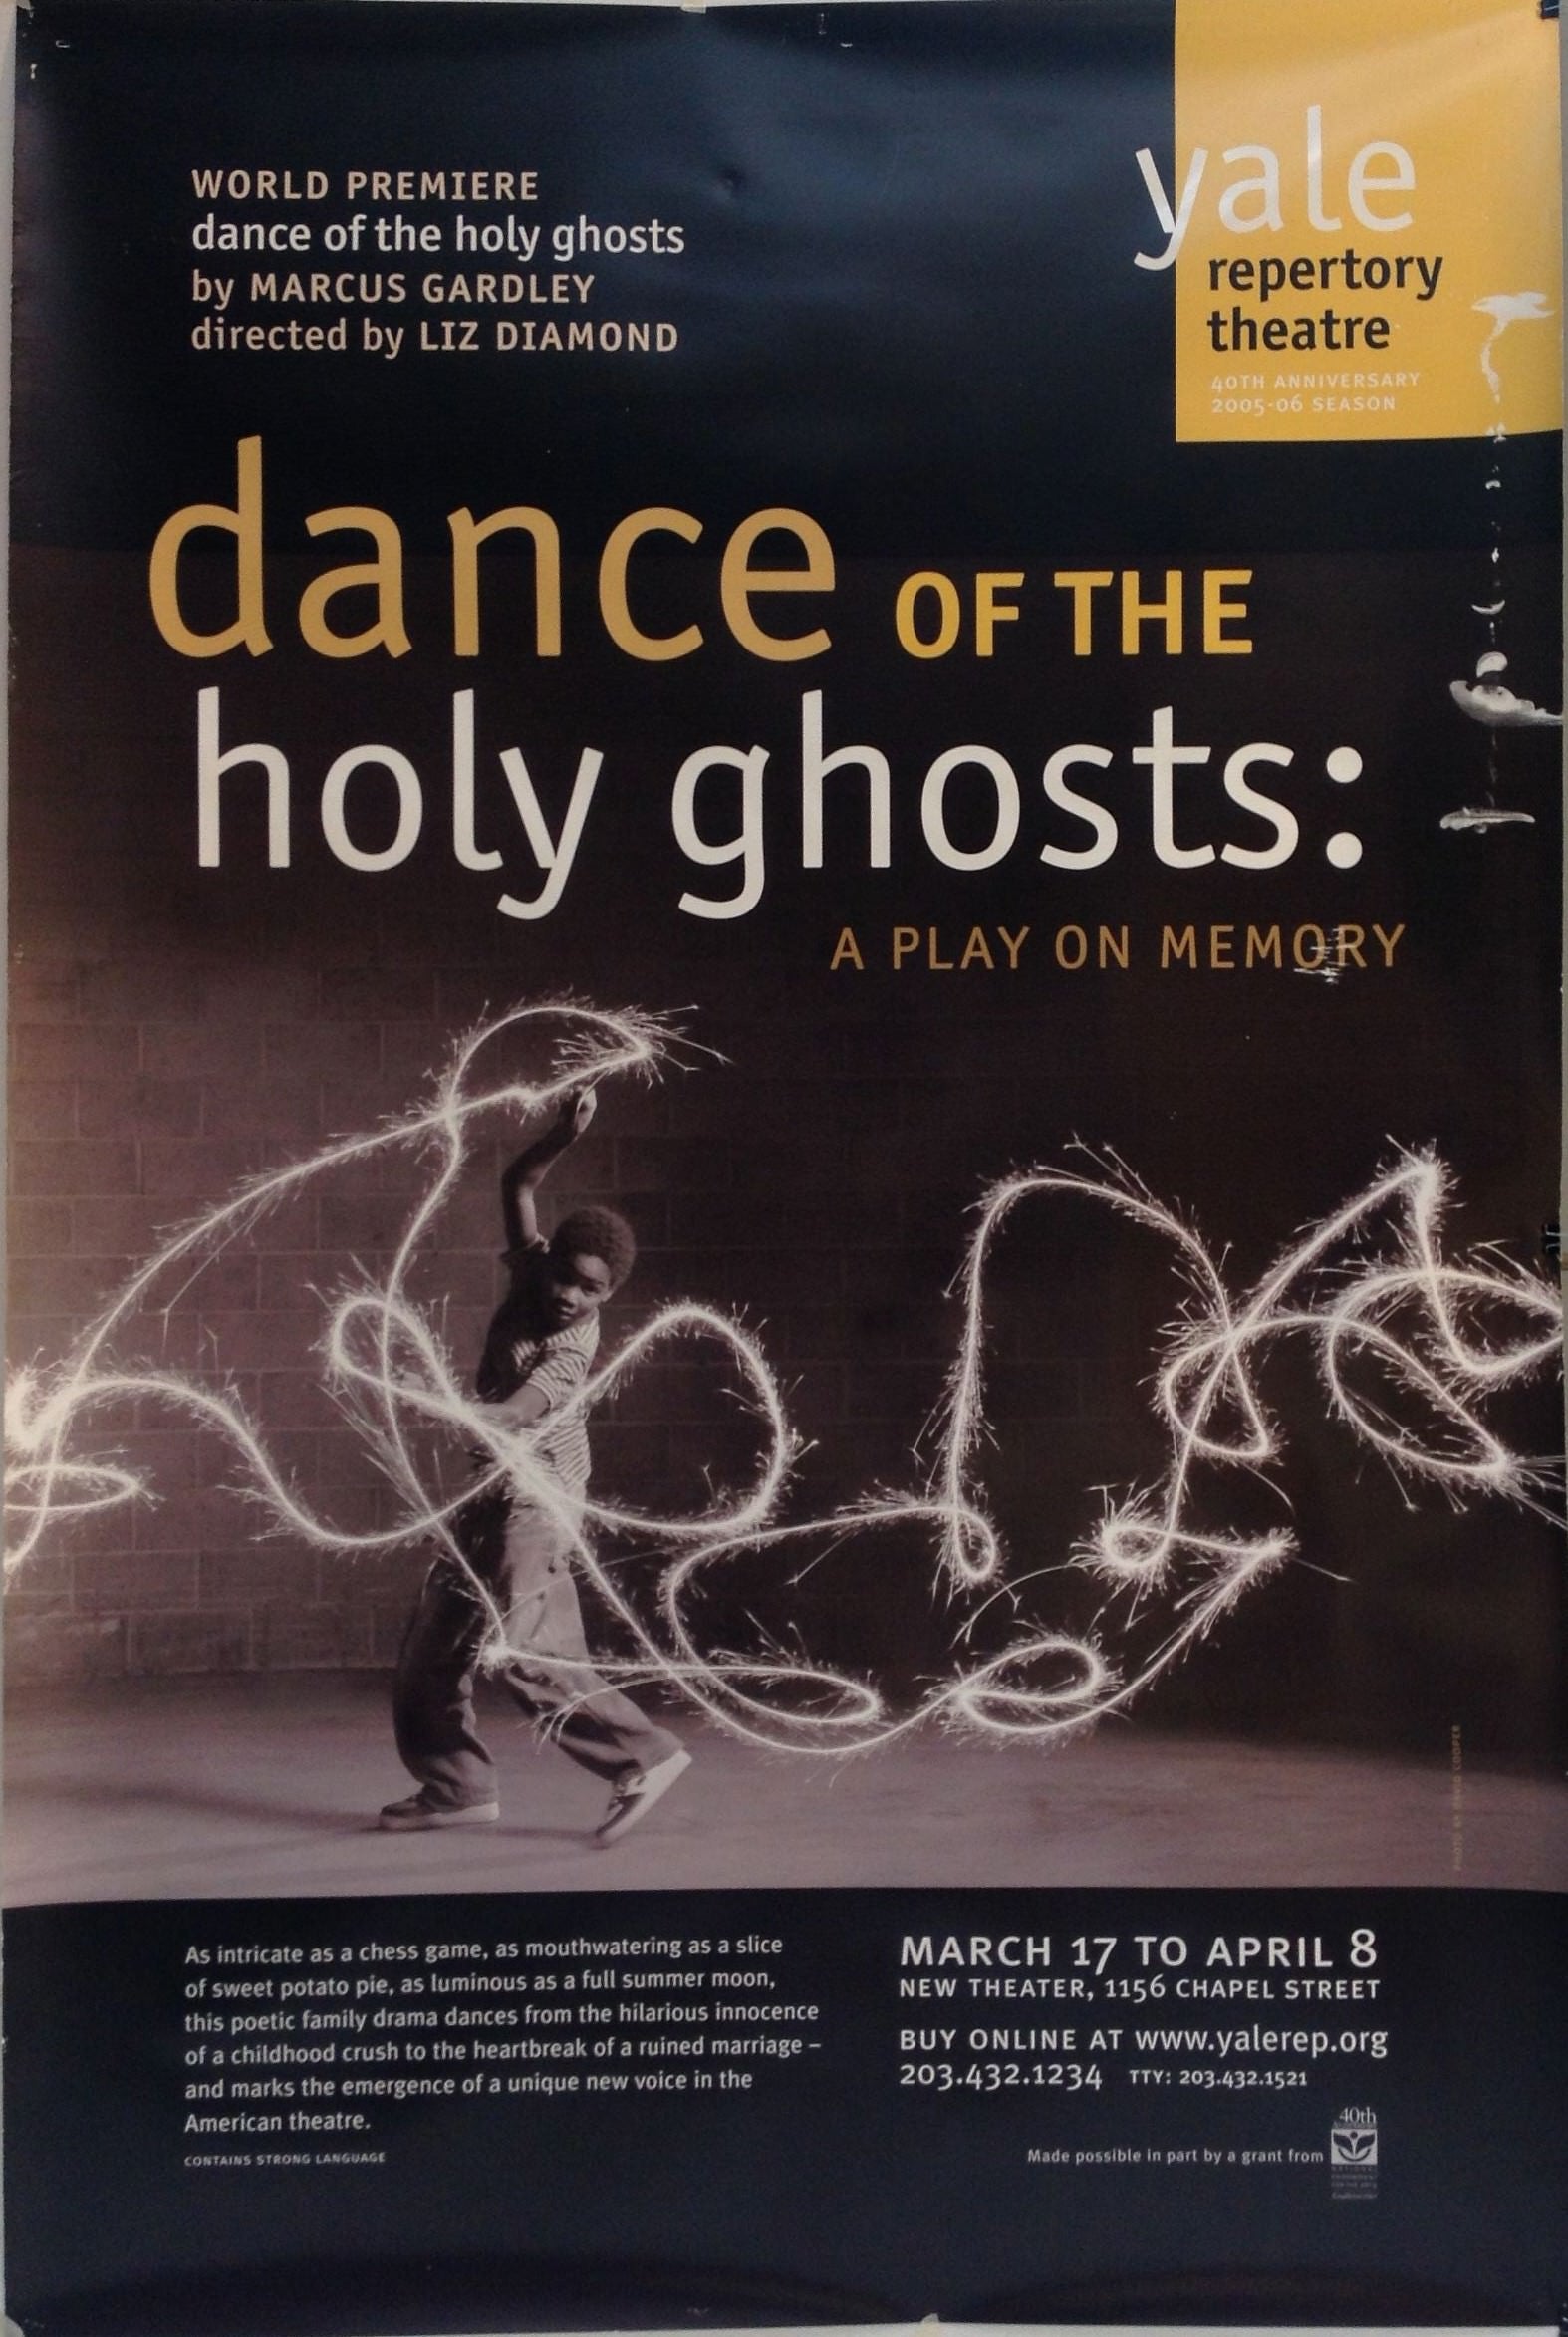 Dance of the Holy Ghosts: A Play on Memory